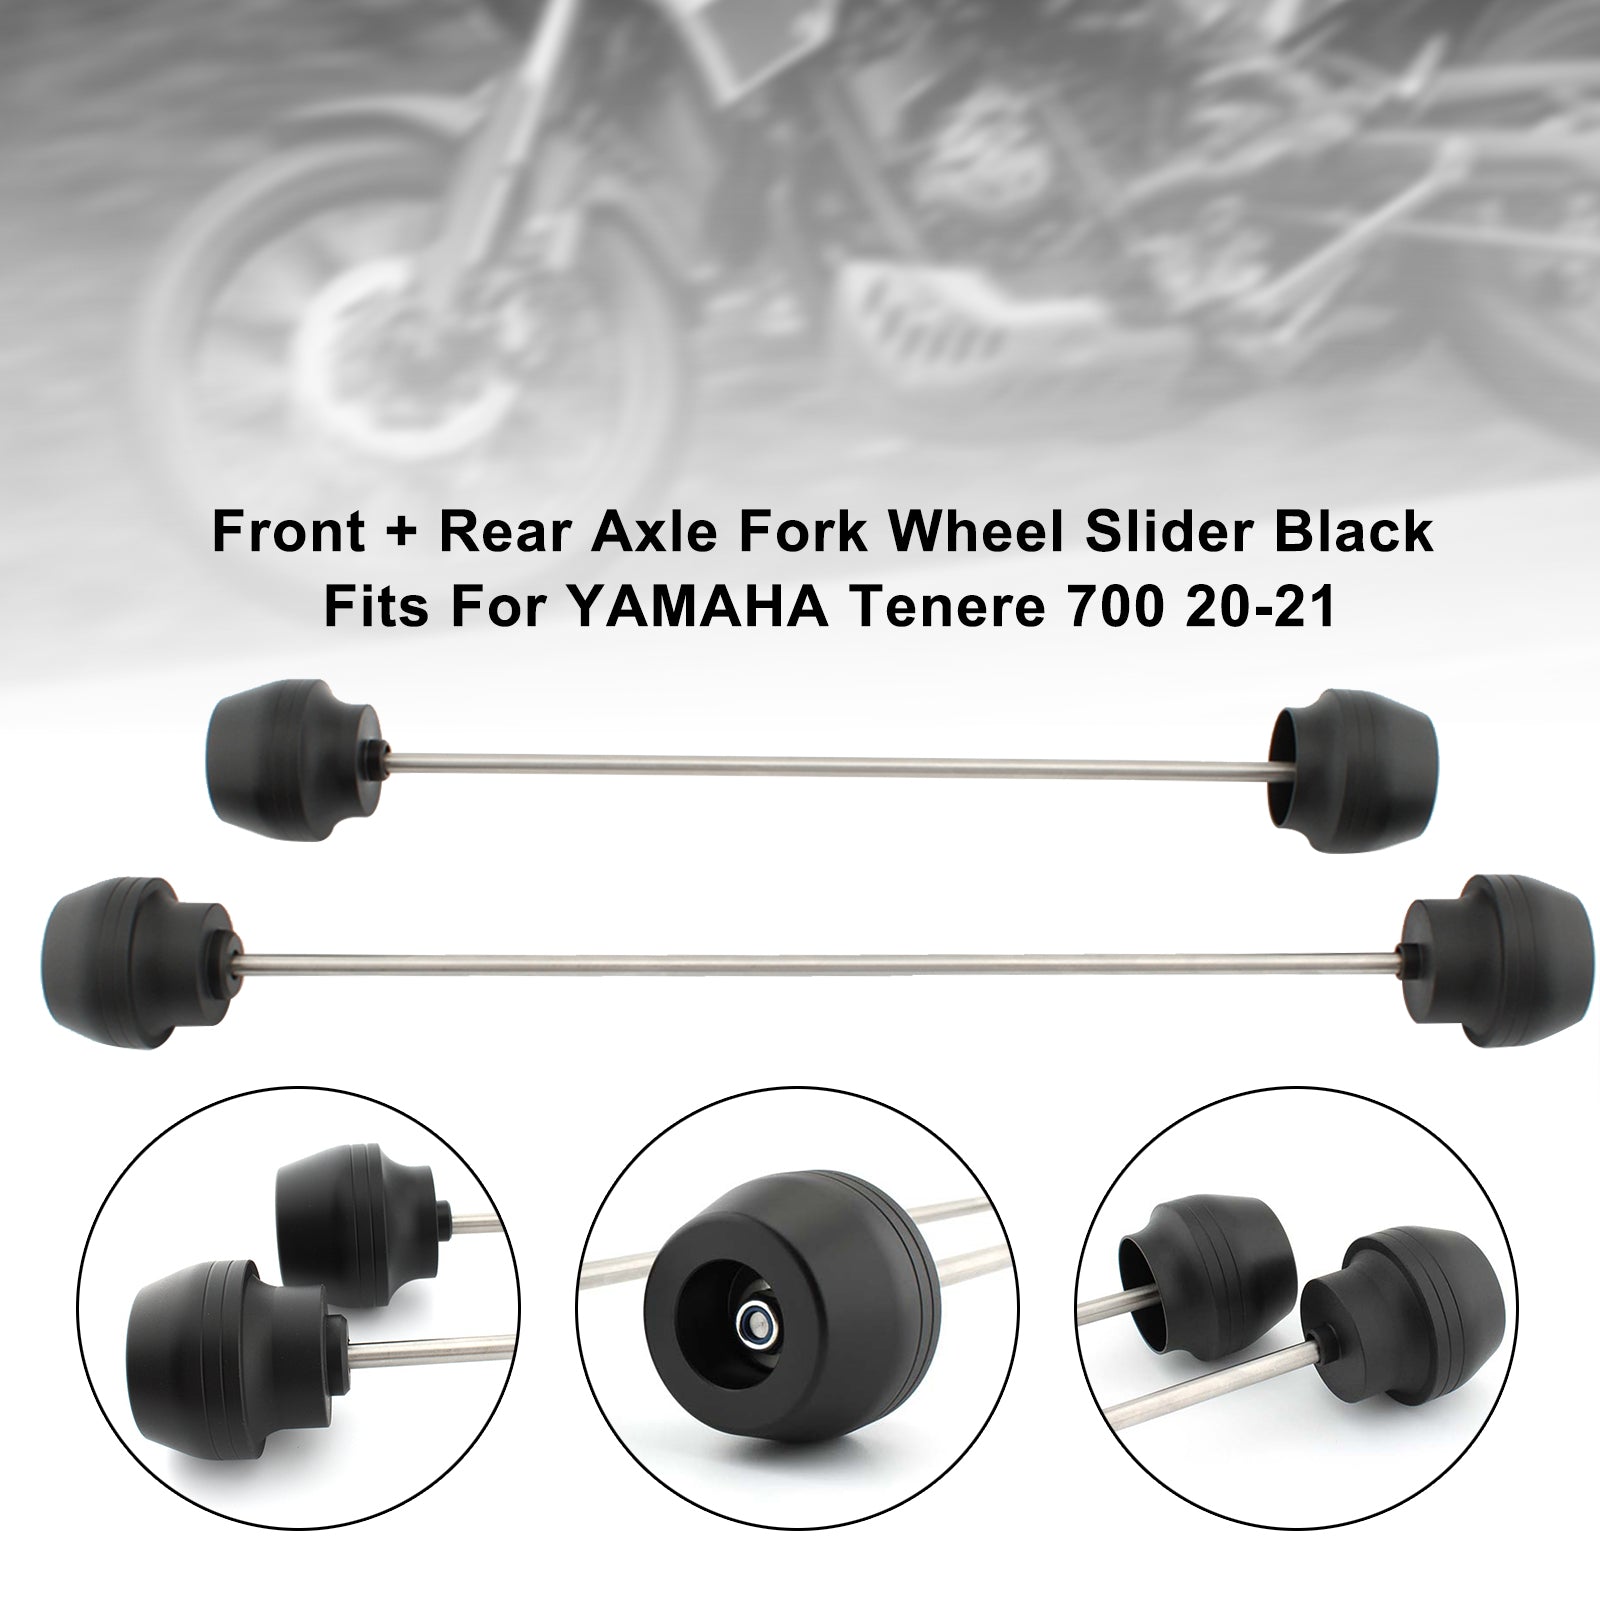 Front + Rear Axle Fork Wheel Slider Cnc Black Fits For Yamaha Tenere 700 20-21 Generic